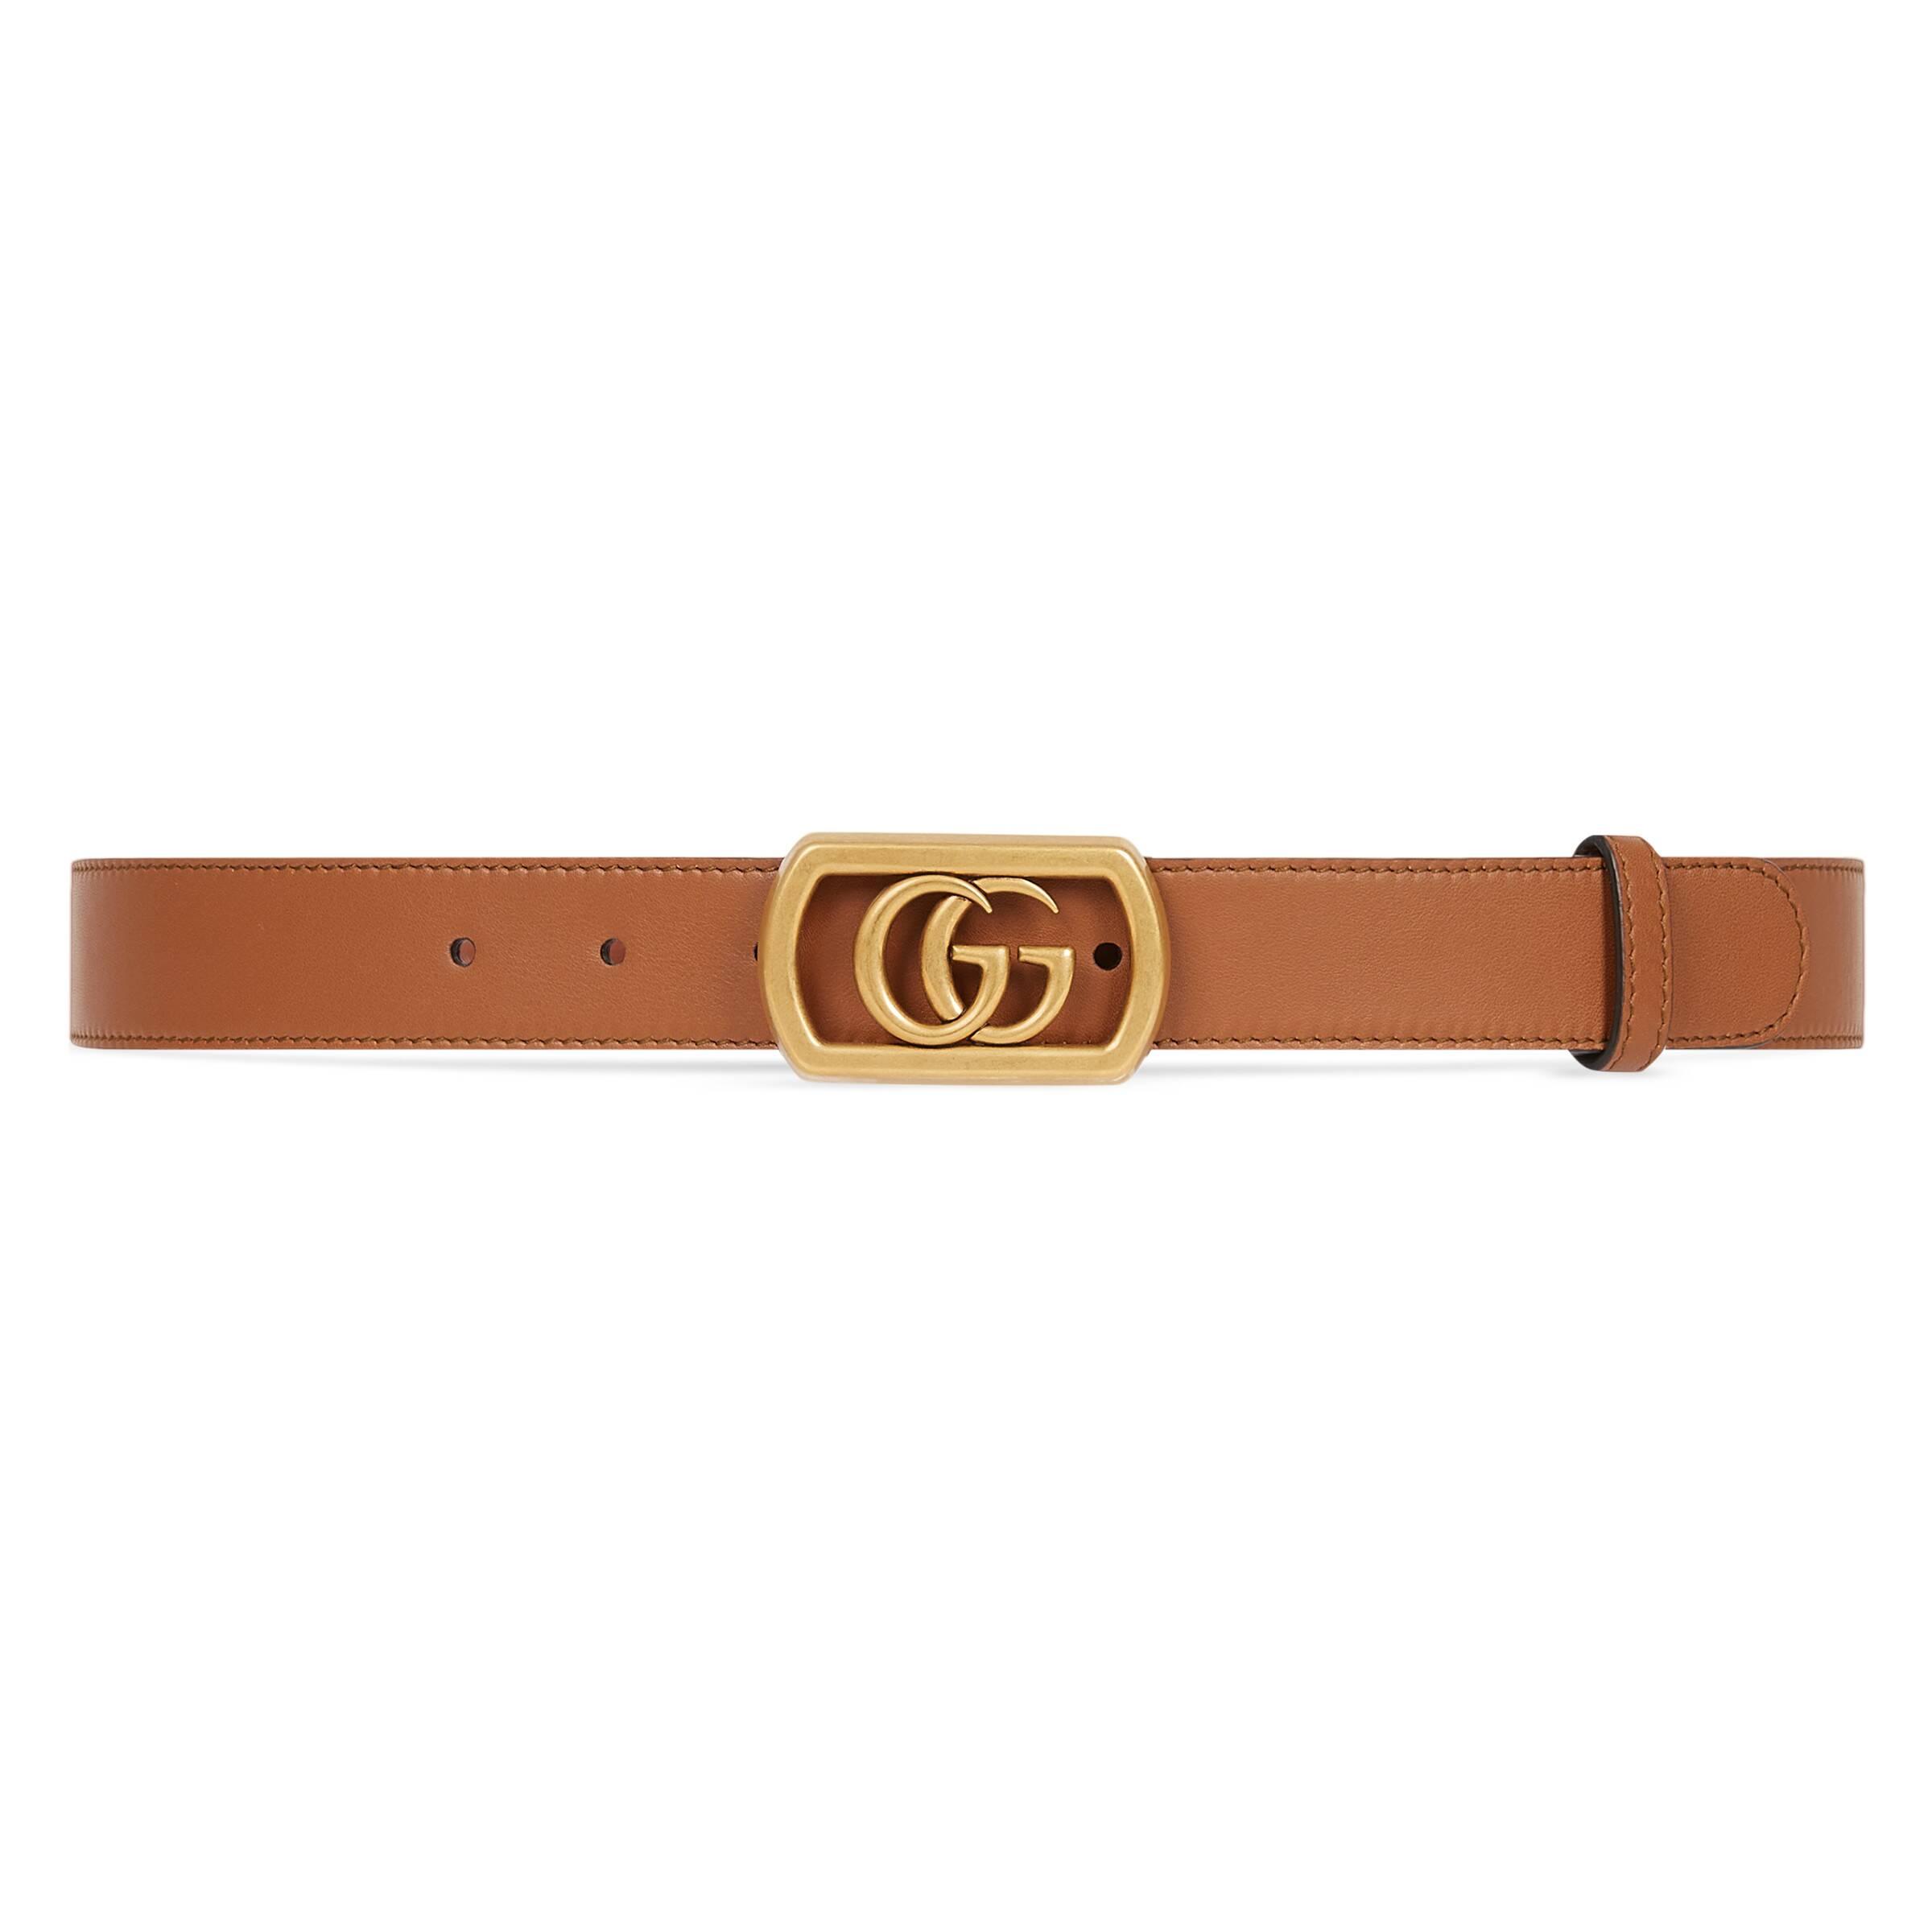 GG belt with Double G buckle - Urban Apparel